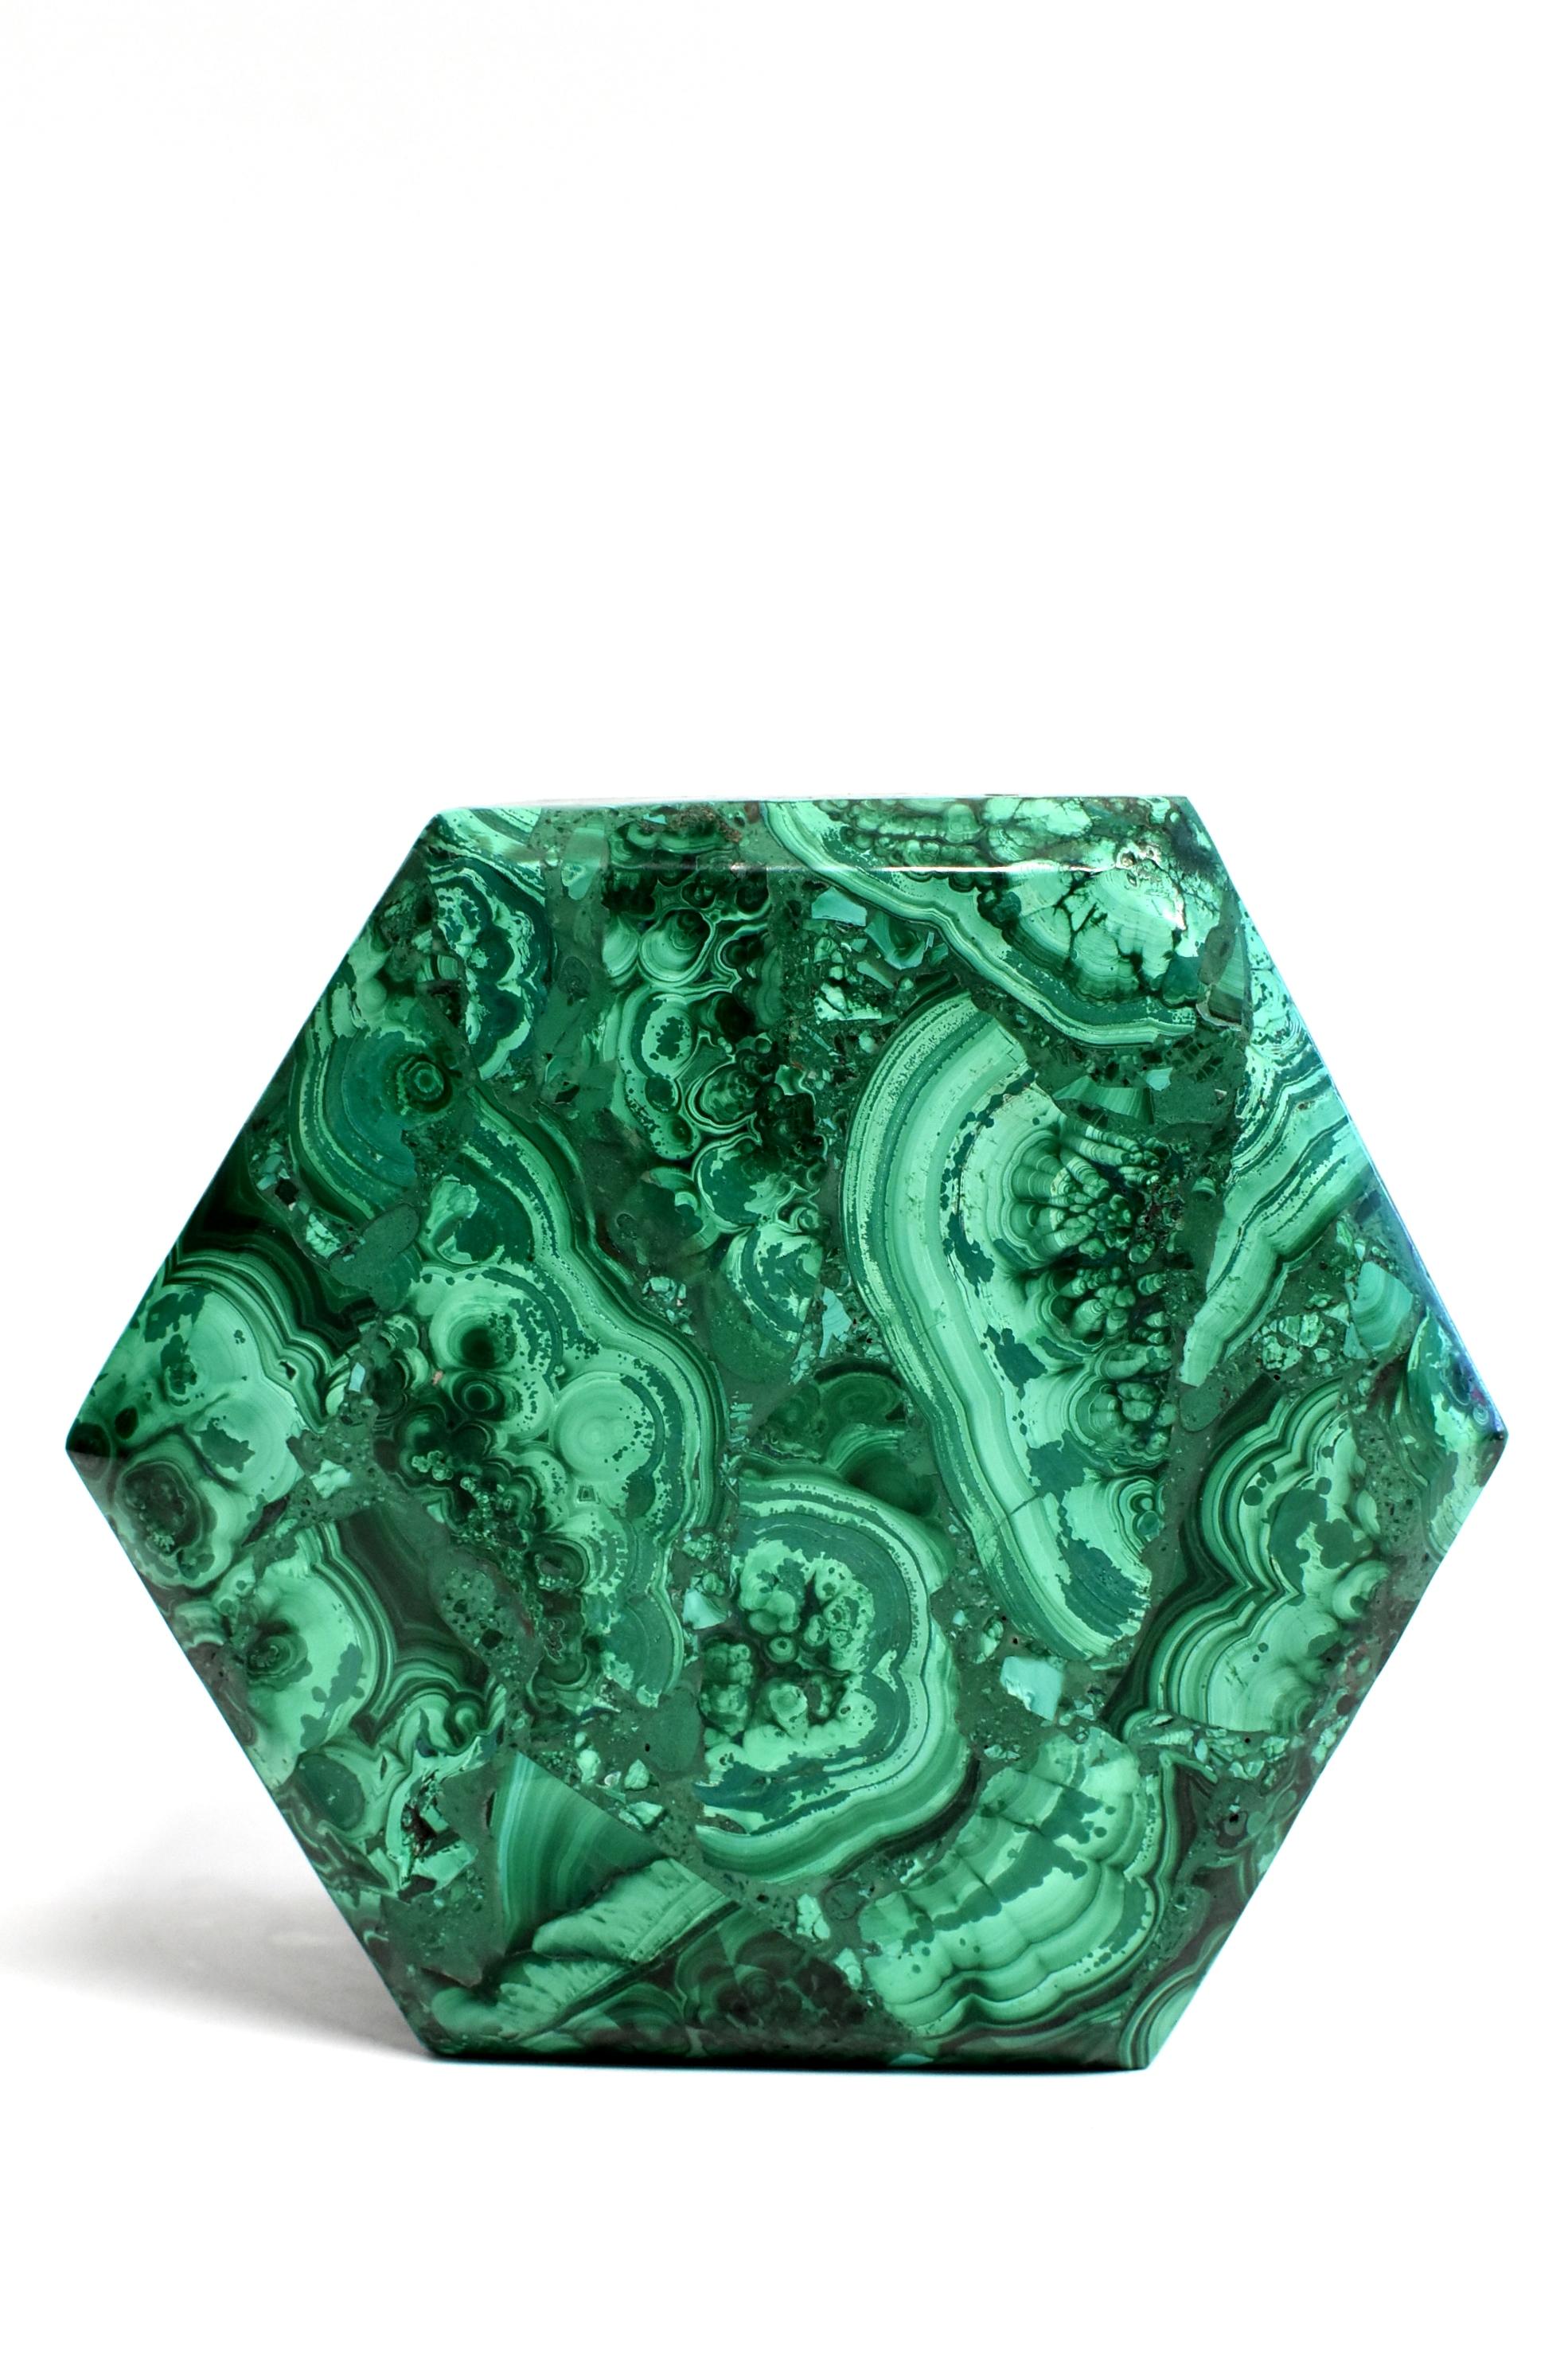 A stunning, all natural 2.76 lb malachite box. Splendid swirls and patterns, this remarkable pieces adds a luxurious and sophisticated touch to your home. Unique octagon shape and full slabs of malachite. Malachite is a stone of transformation,